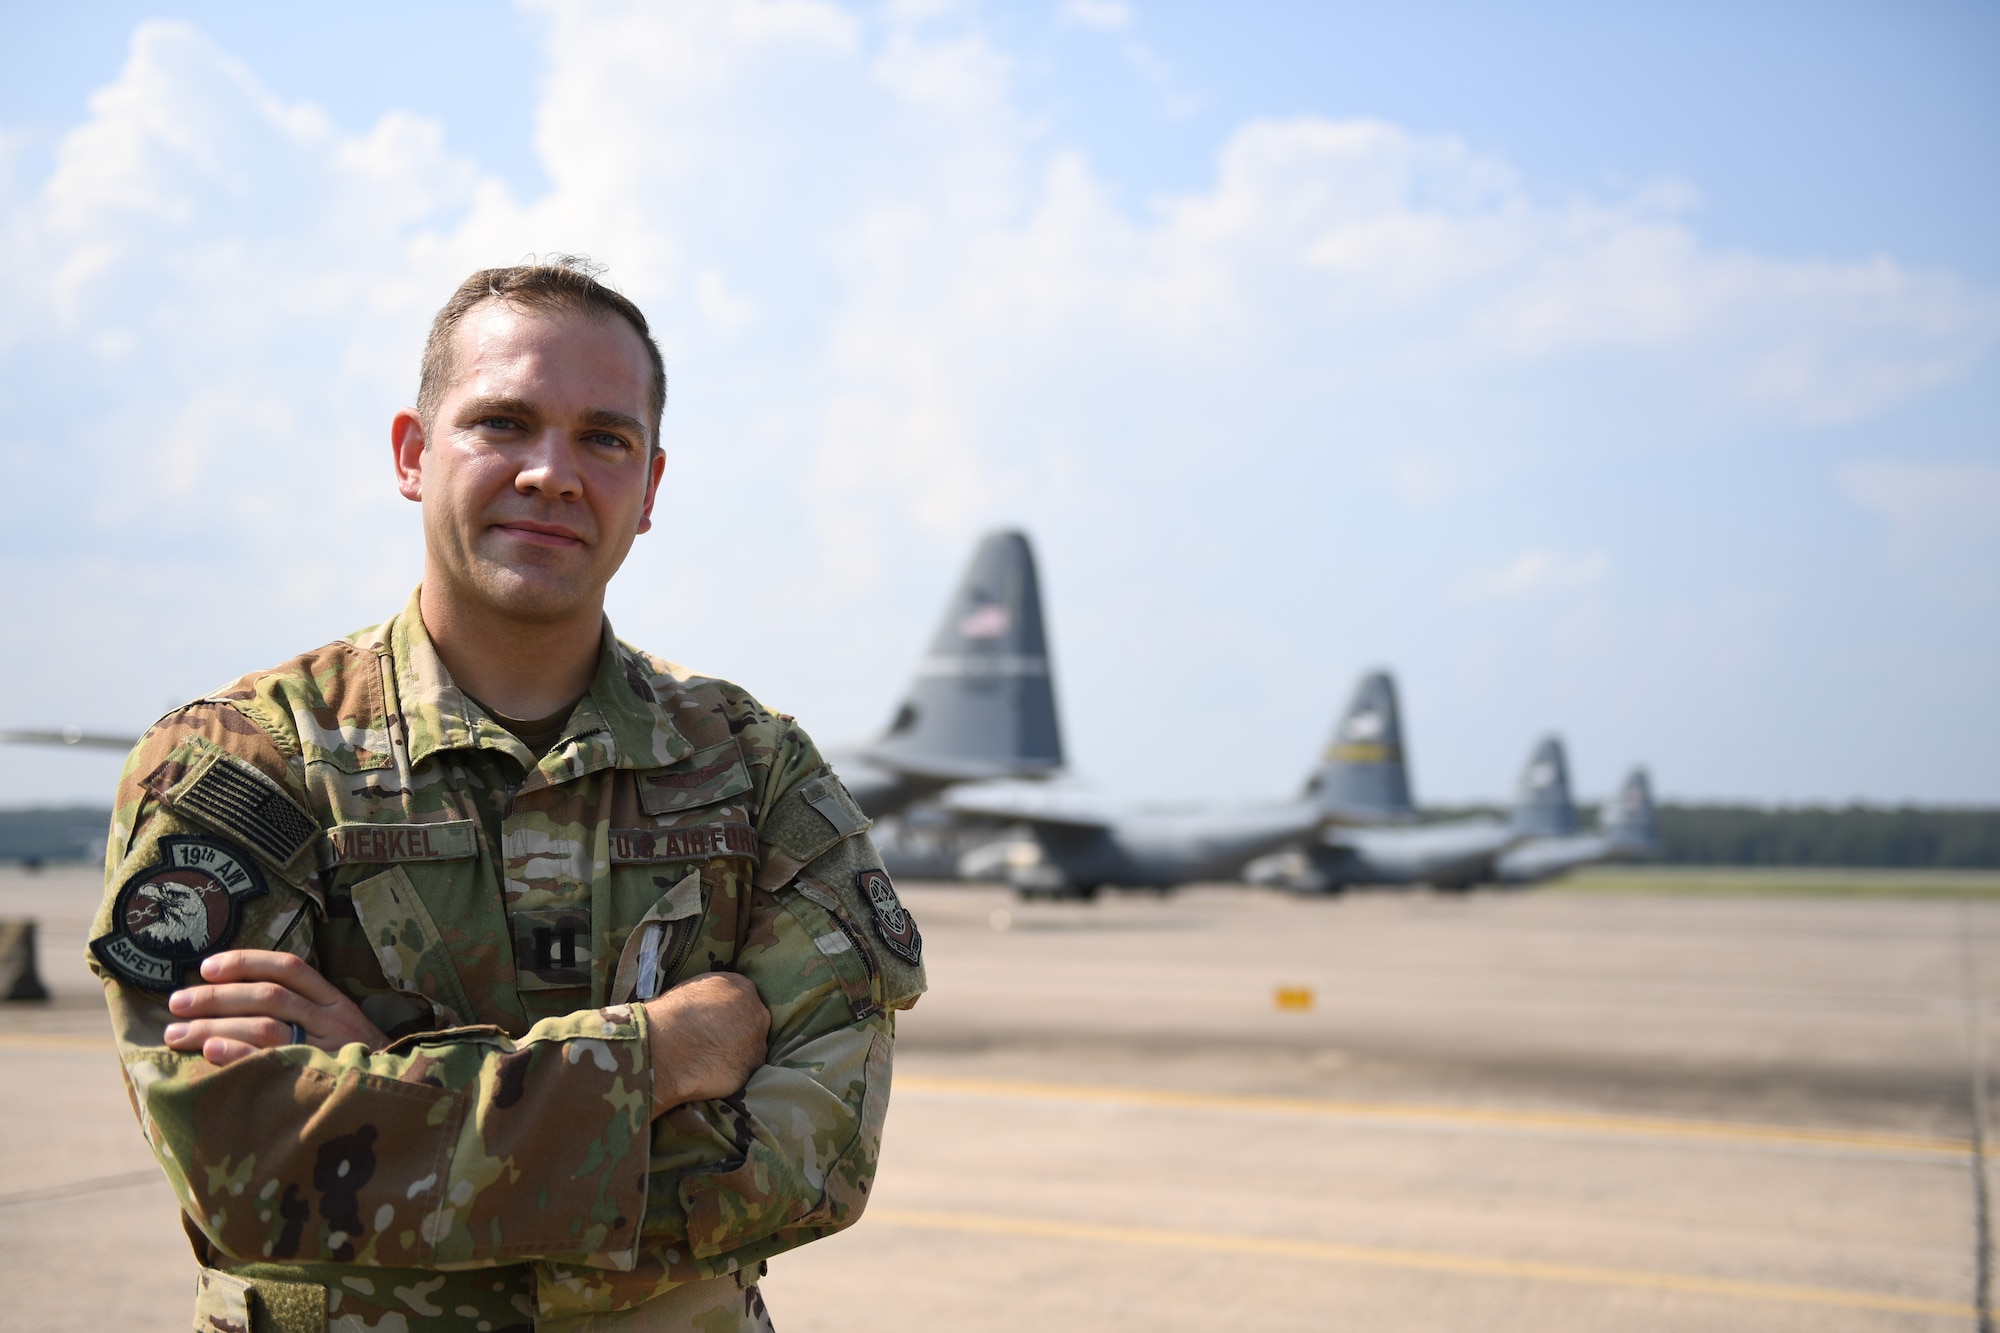 An Air Force Officer poses for a photo on a flight line.